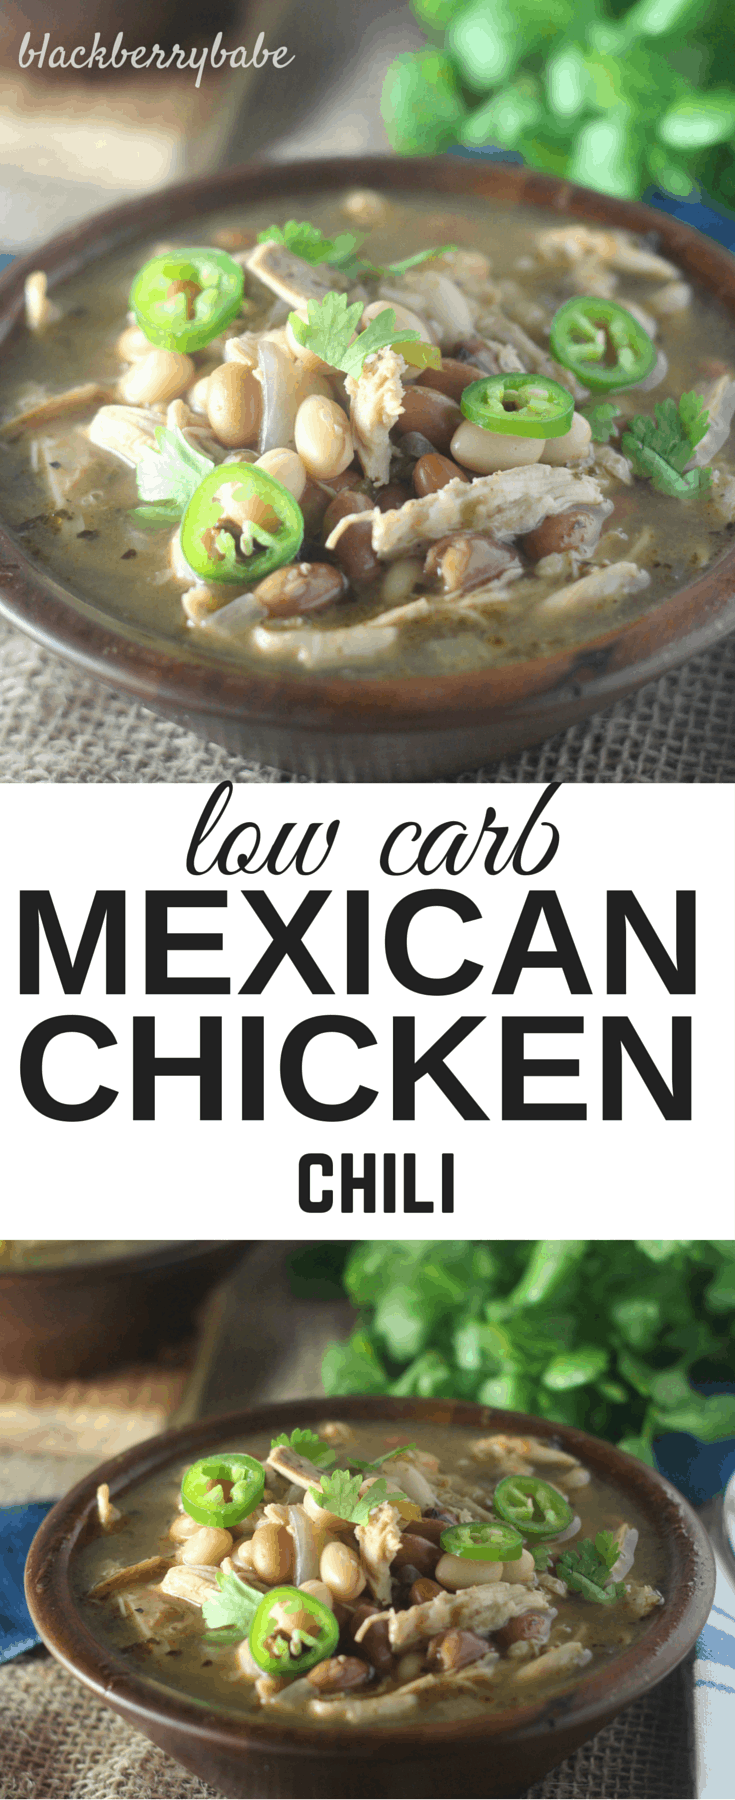 Low Carb Mexican Chicken Chili #NutritionMatters www.blackberrybabe.com